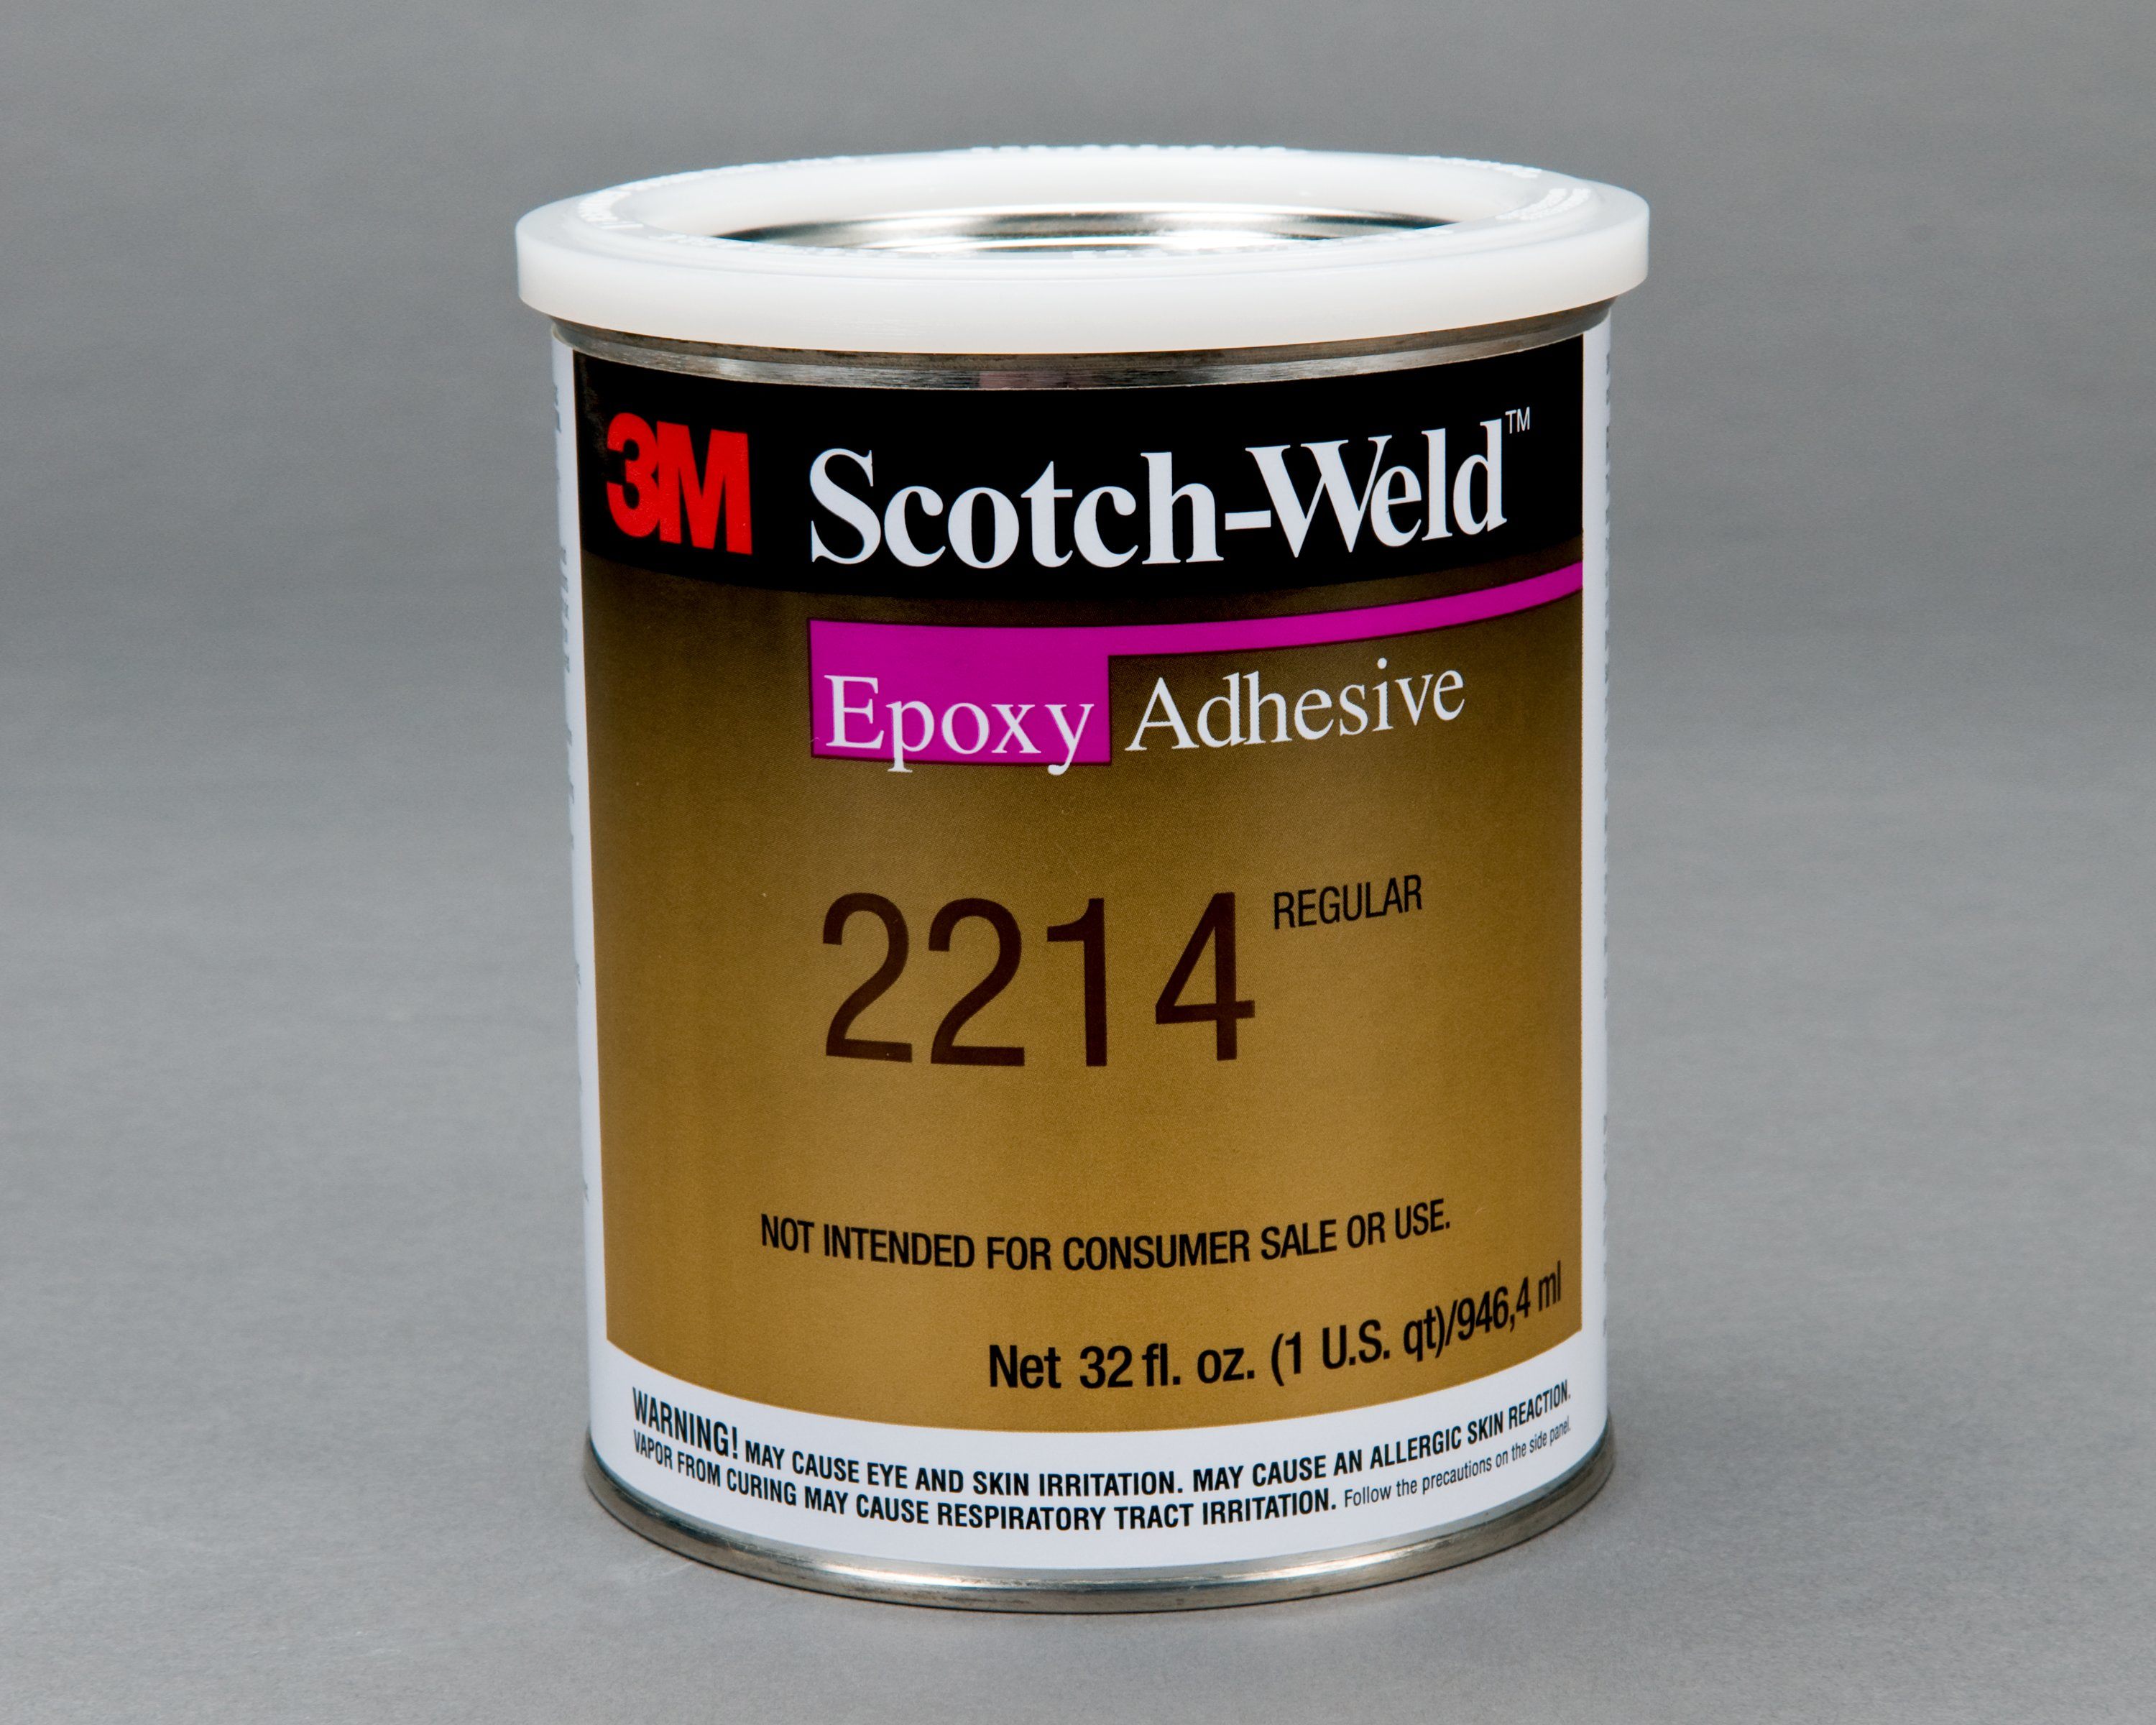 3M™ Scotch-Weld™ Epoxy Adhesive 2214 Hi-Temp New Formula is designed for use in applications where high strength bonds are needed in a temperature range of -180°F to 350°F (-82°C to 177°C).